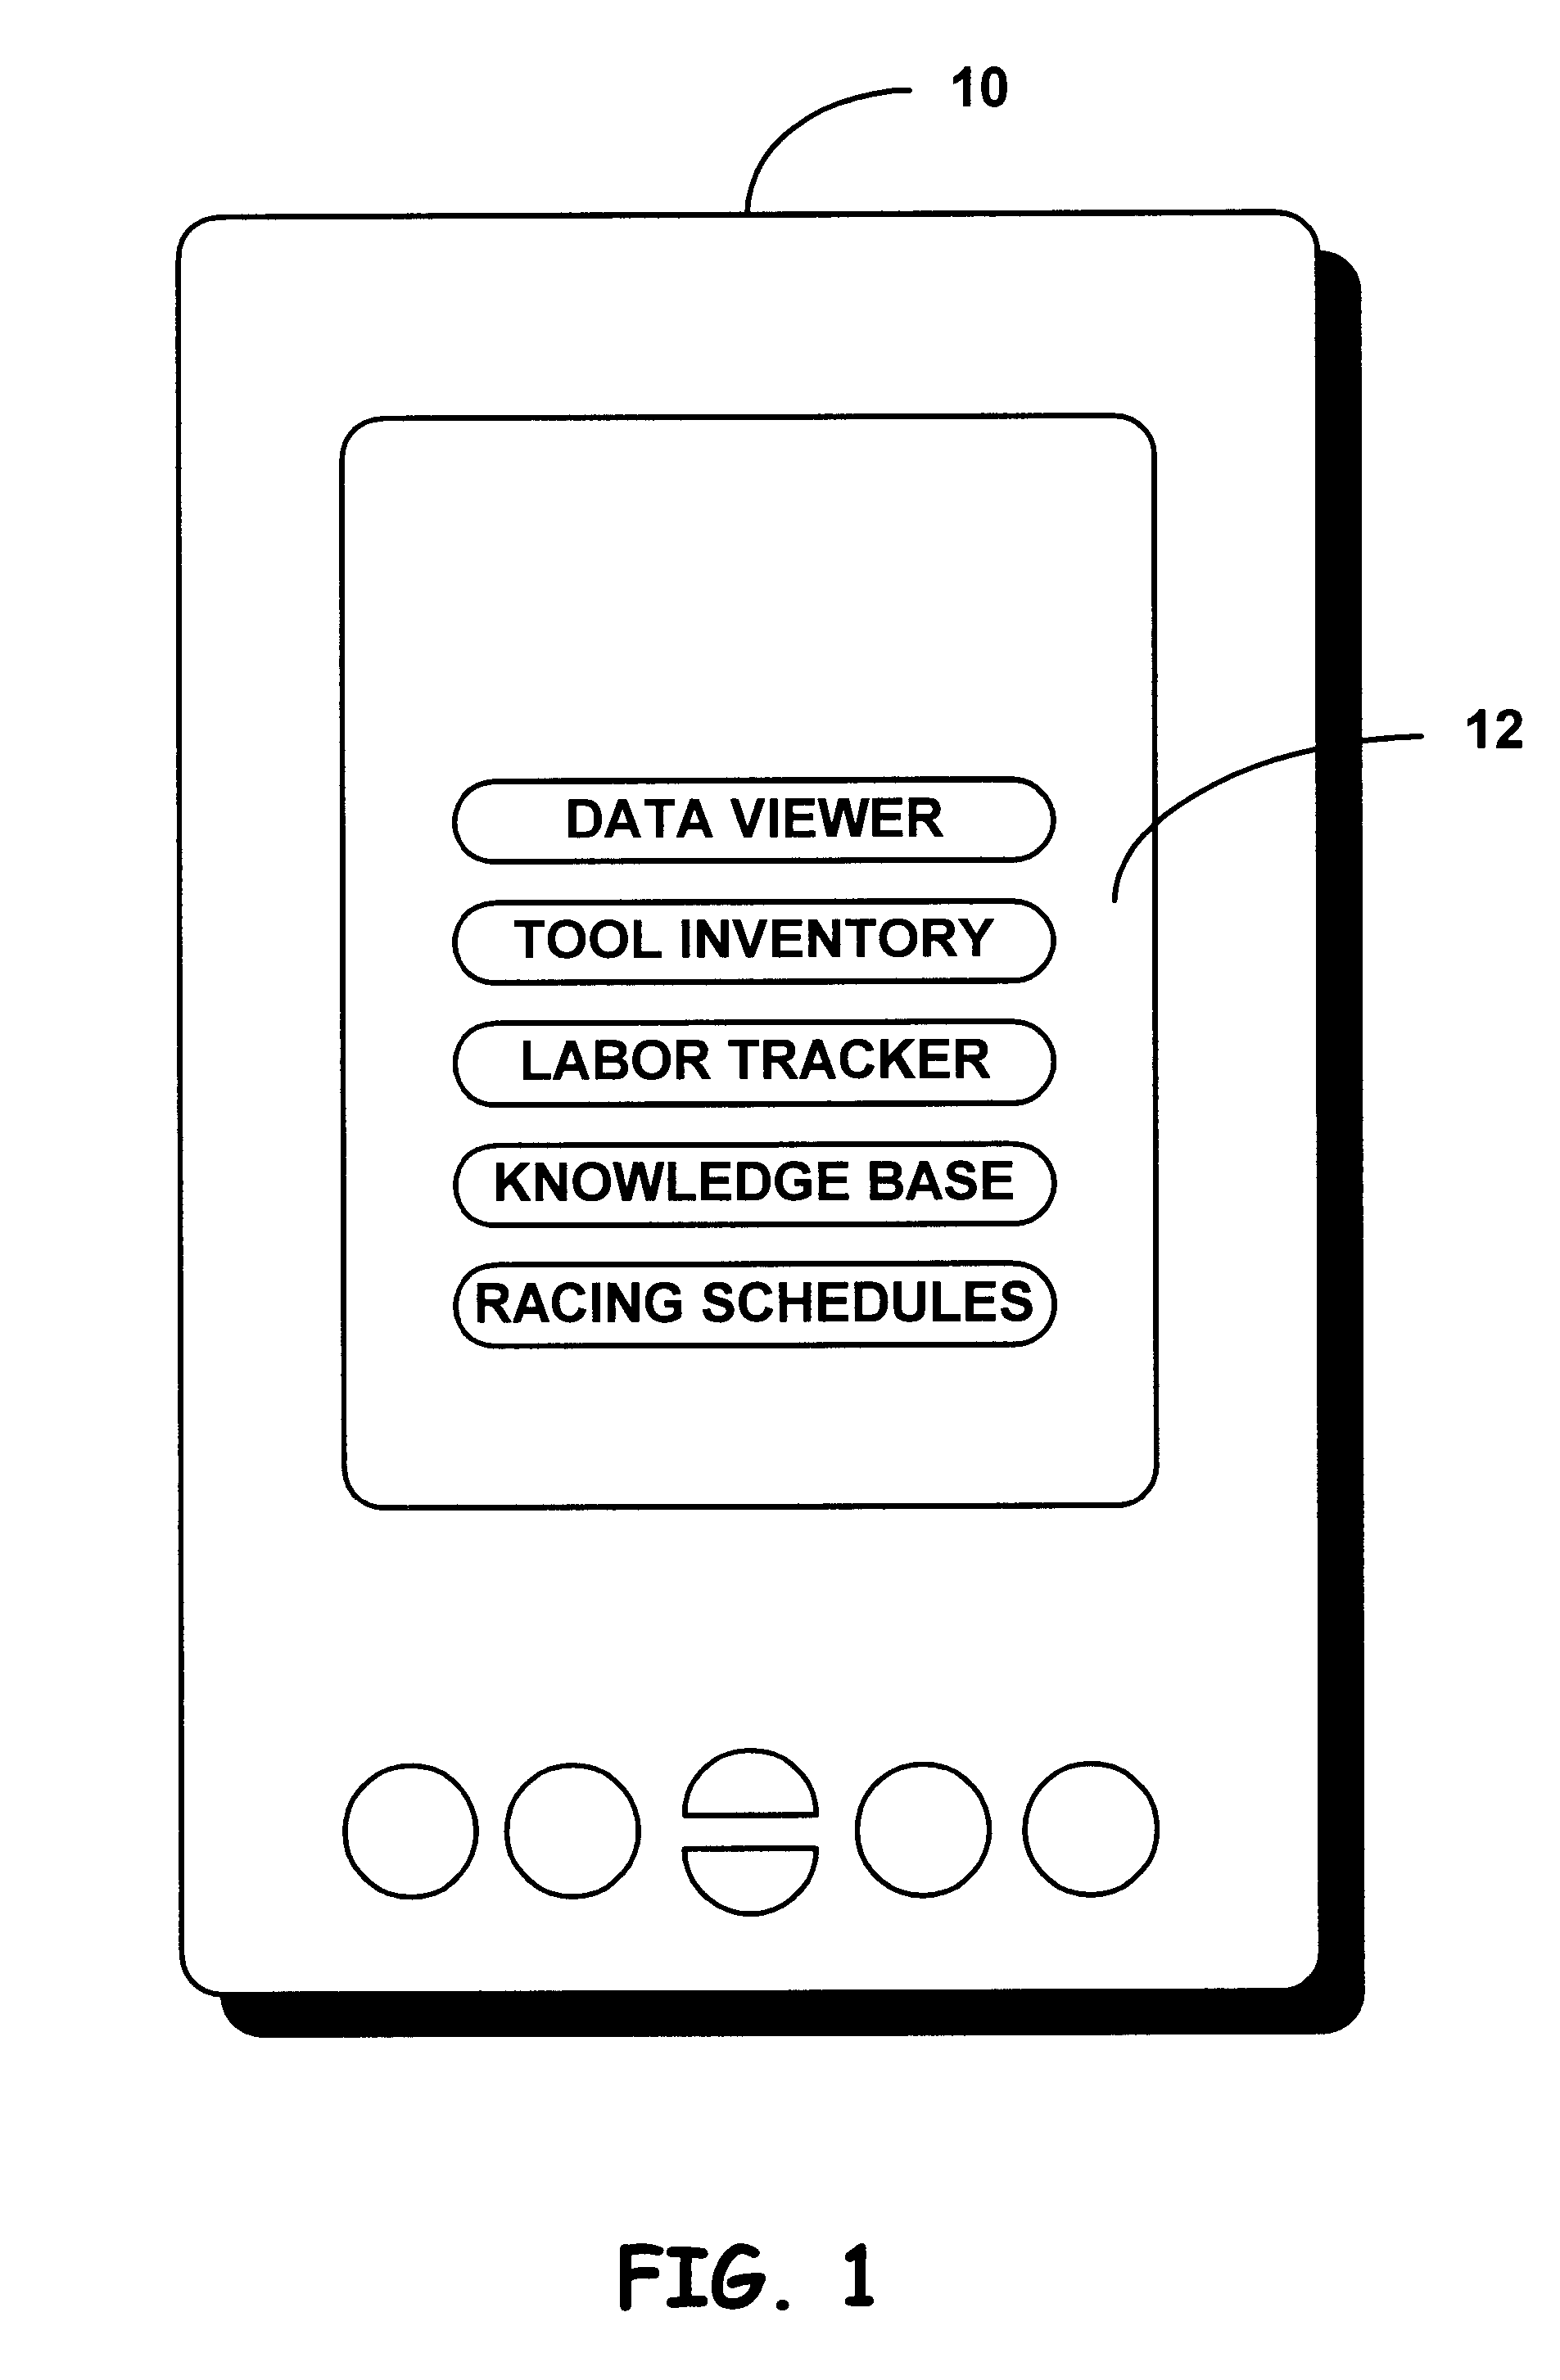 Textual data storage system and method